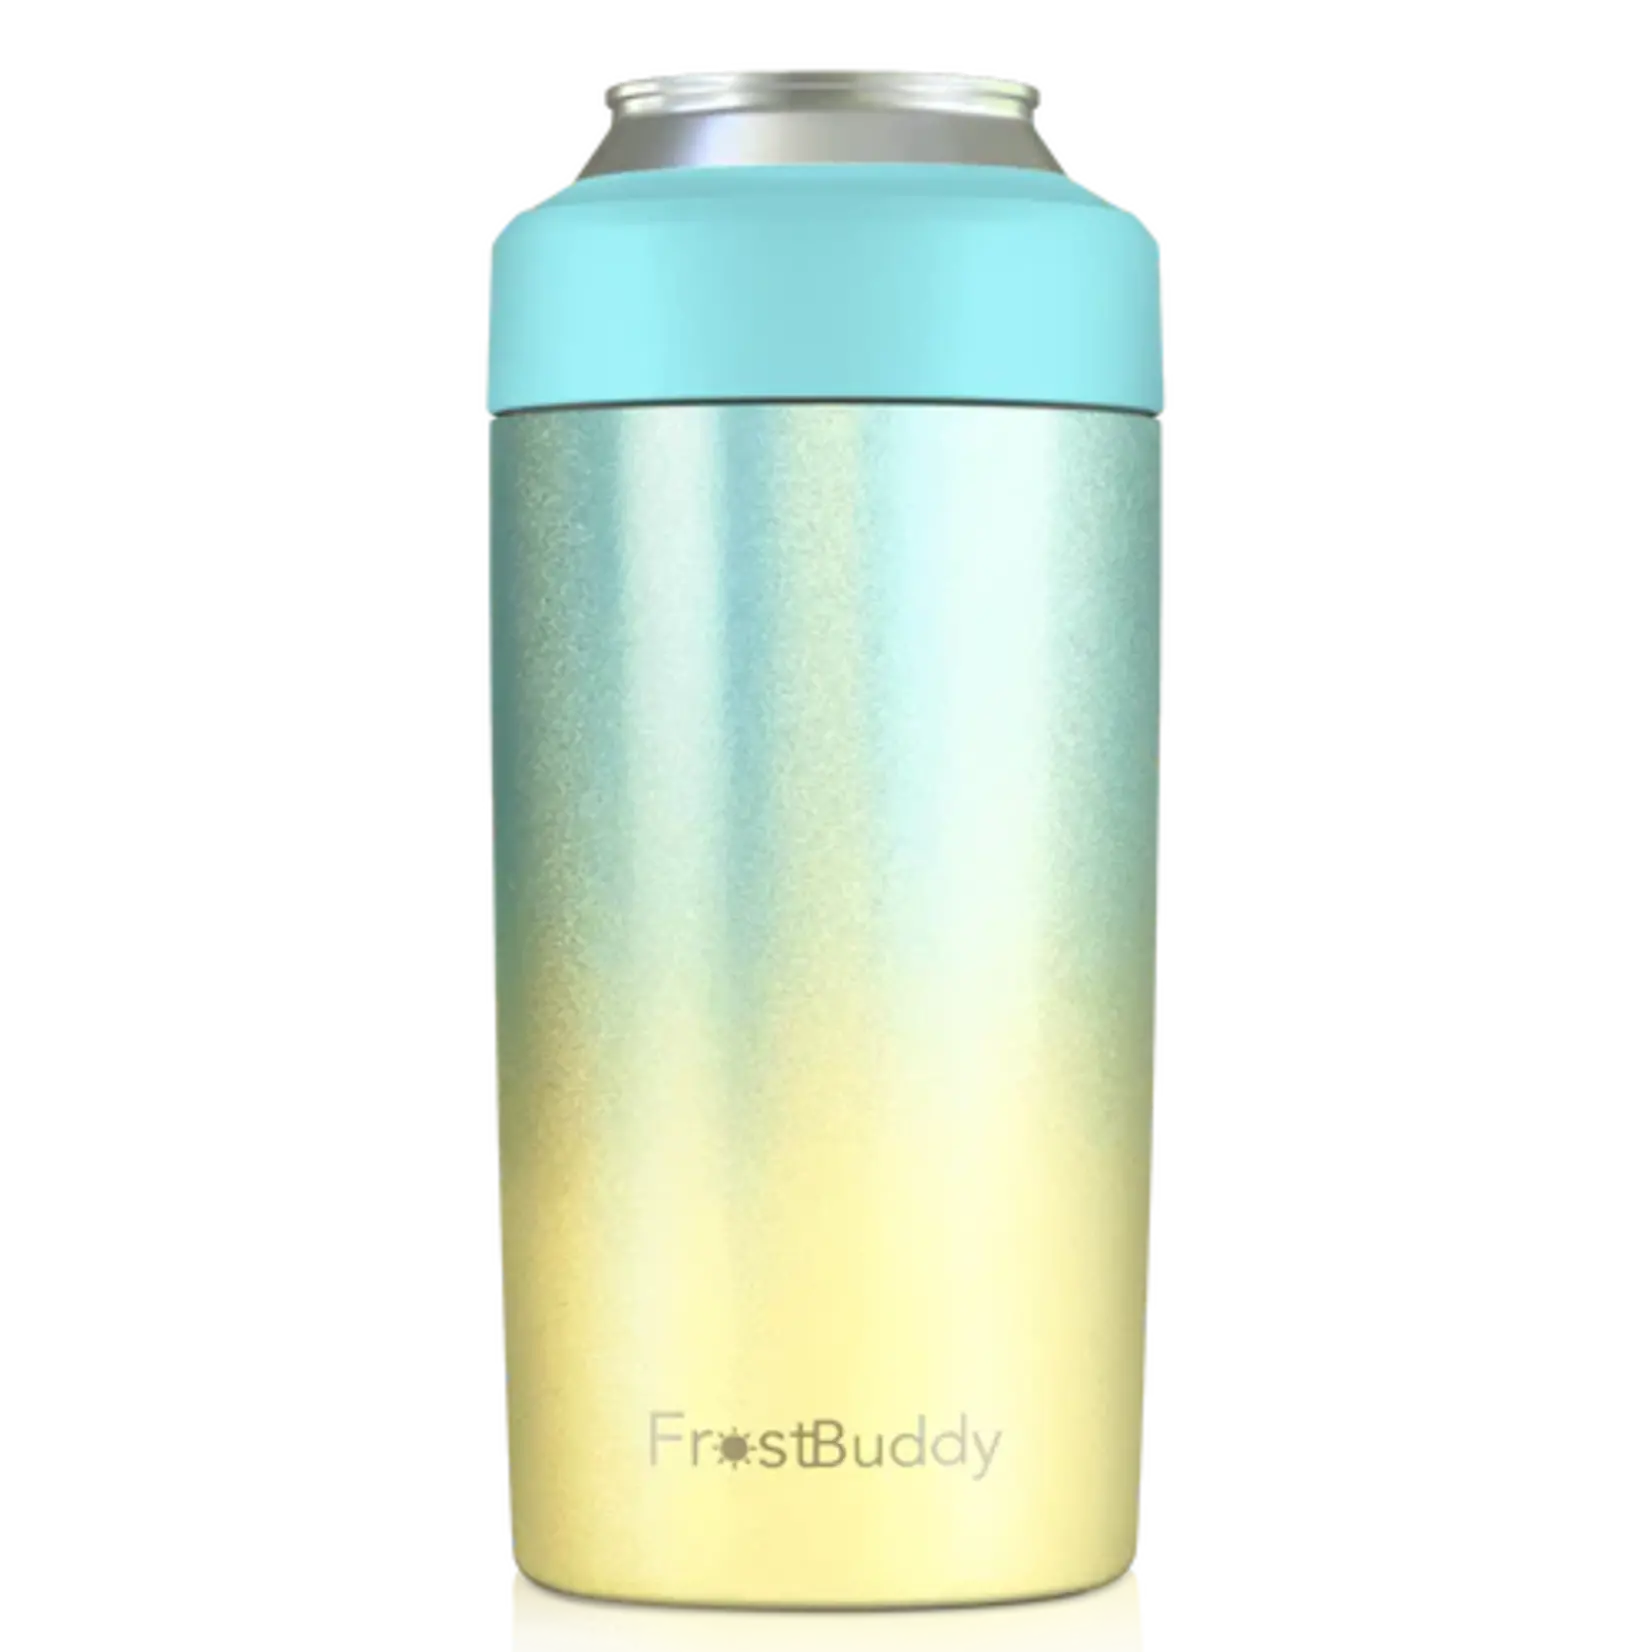 Frost Buddy Universal Can Cooler, Slim Can Cooler, 12 Ounce Can Cooler, 